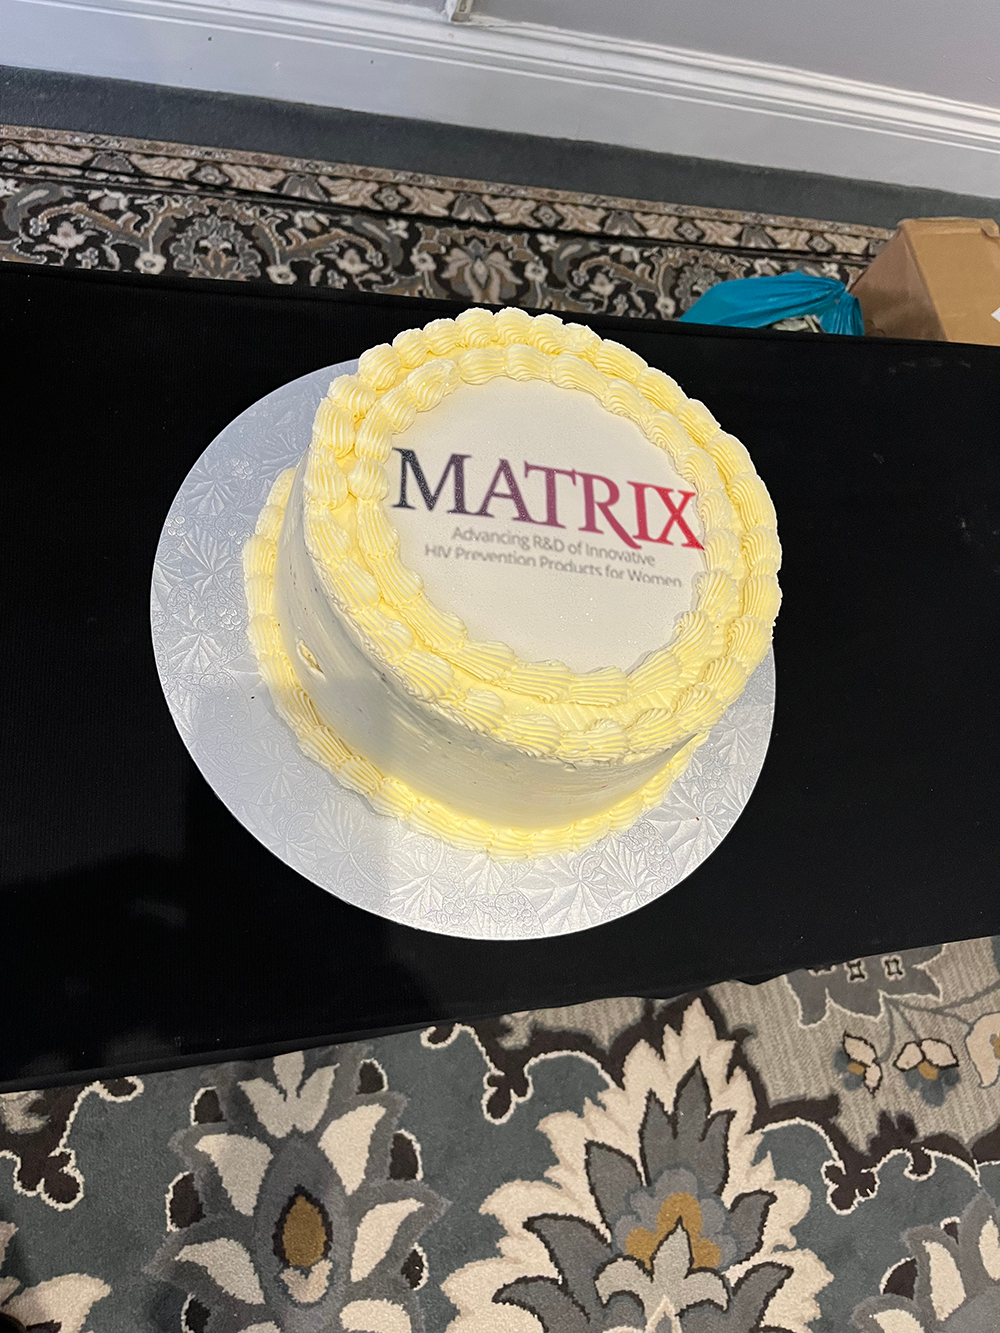 Picture of MATRIX cake from meeting img_6333